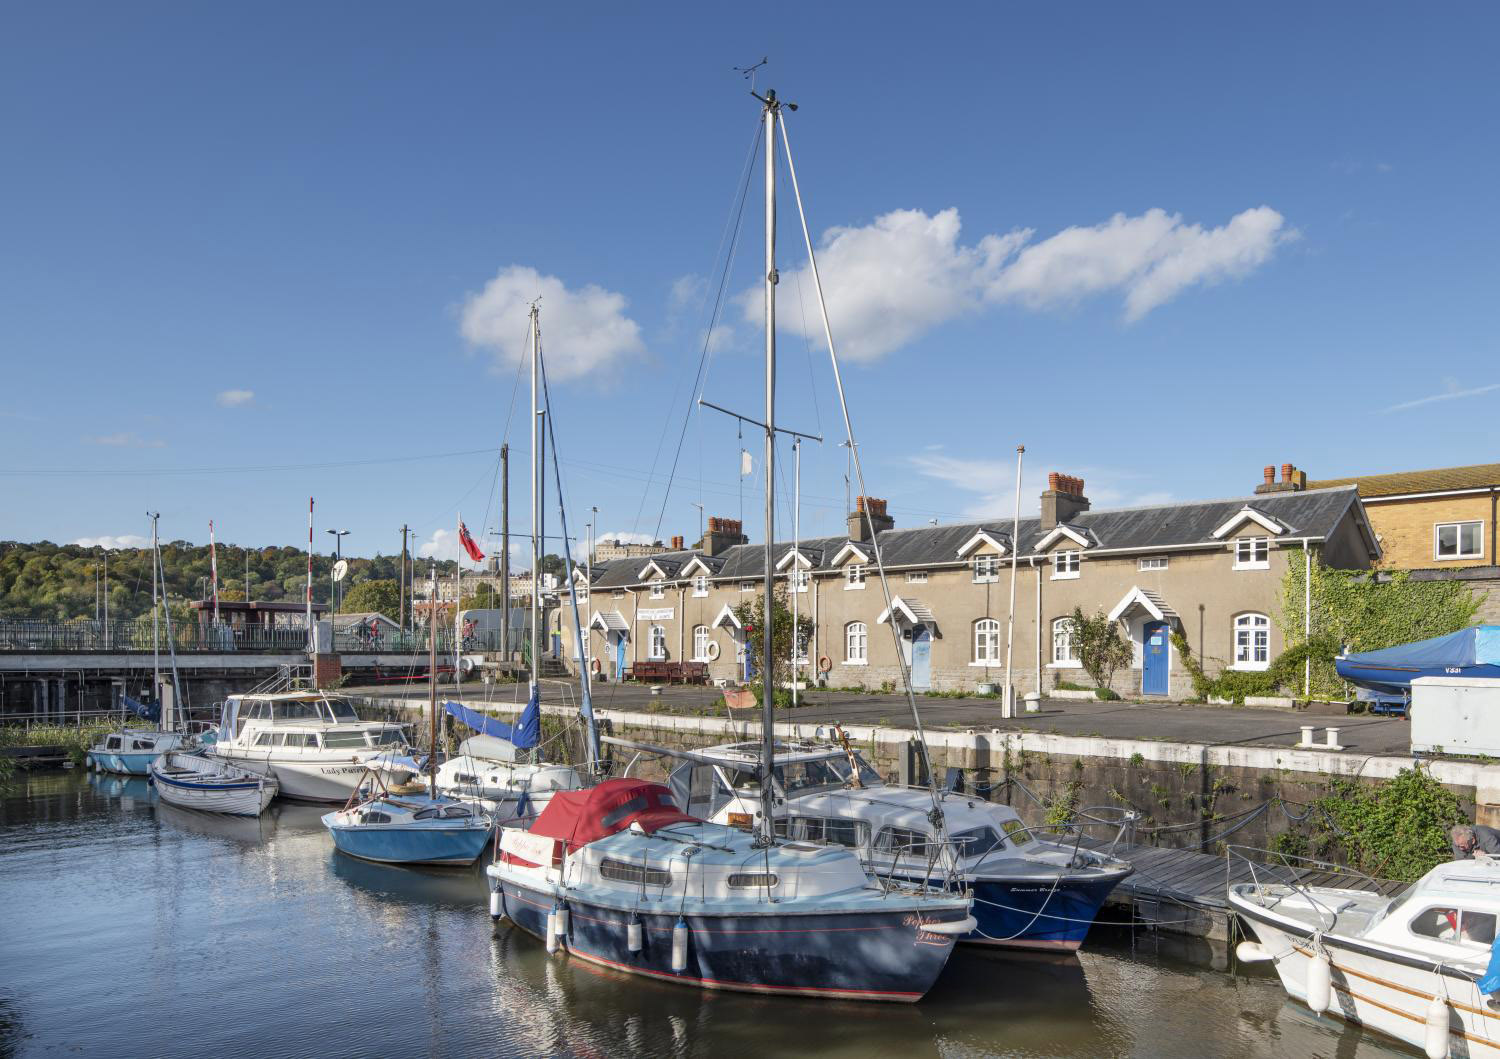 A photograph of a lock with small leisure boats in the foreground. There are historic lock structures on the quayside, including bollards, and cottages beyond.